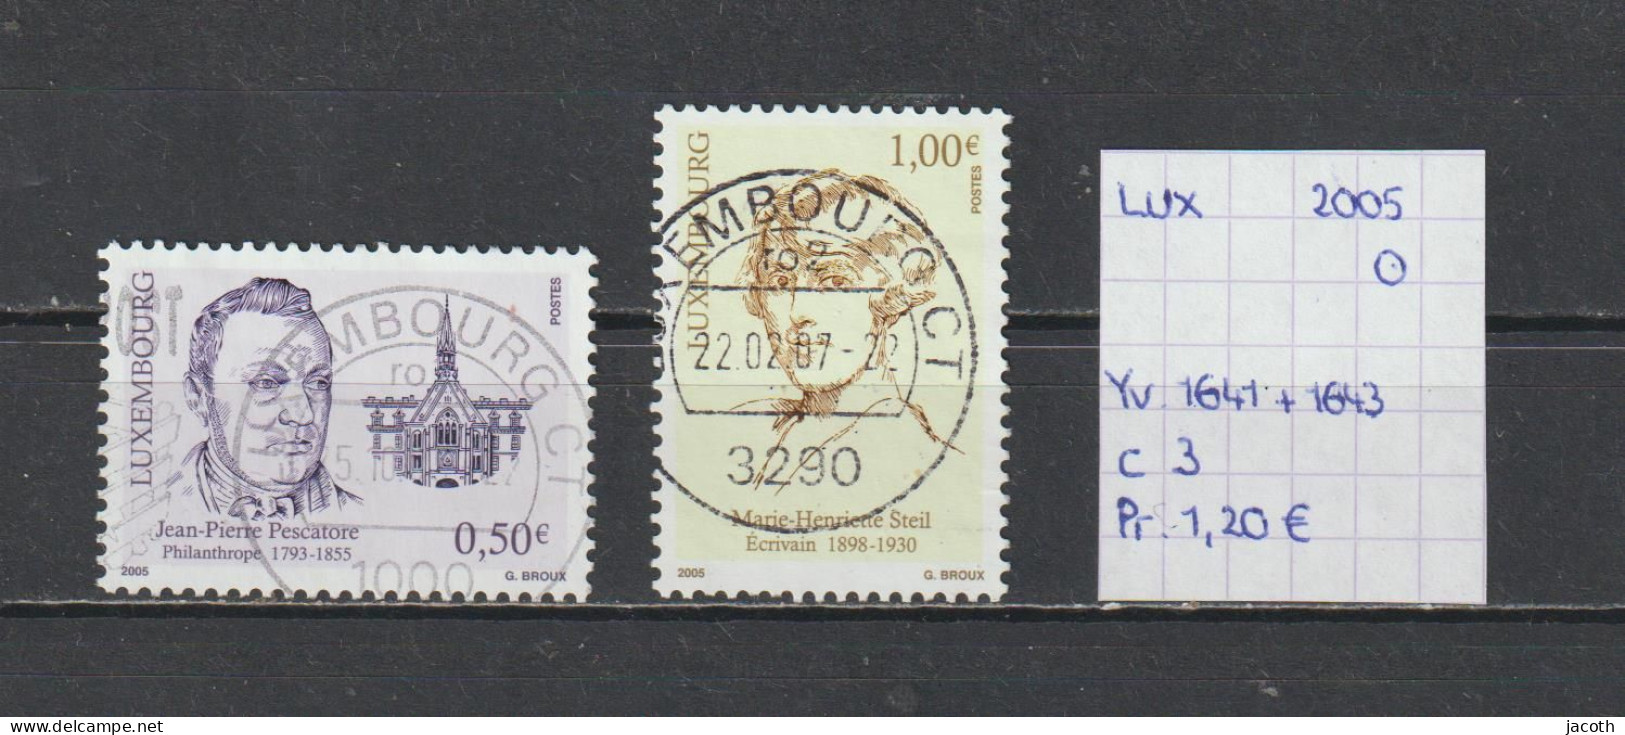 (TJ) Luxembourg 2005 - YT 1641 + 1643 (gest./obl./used) - Usados